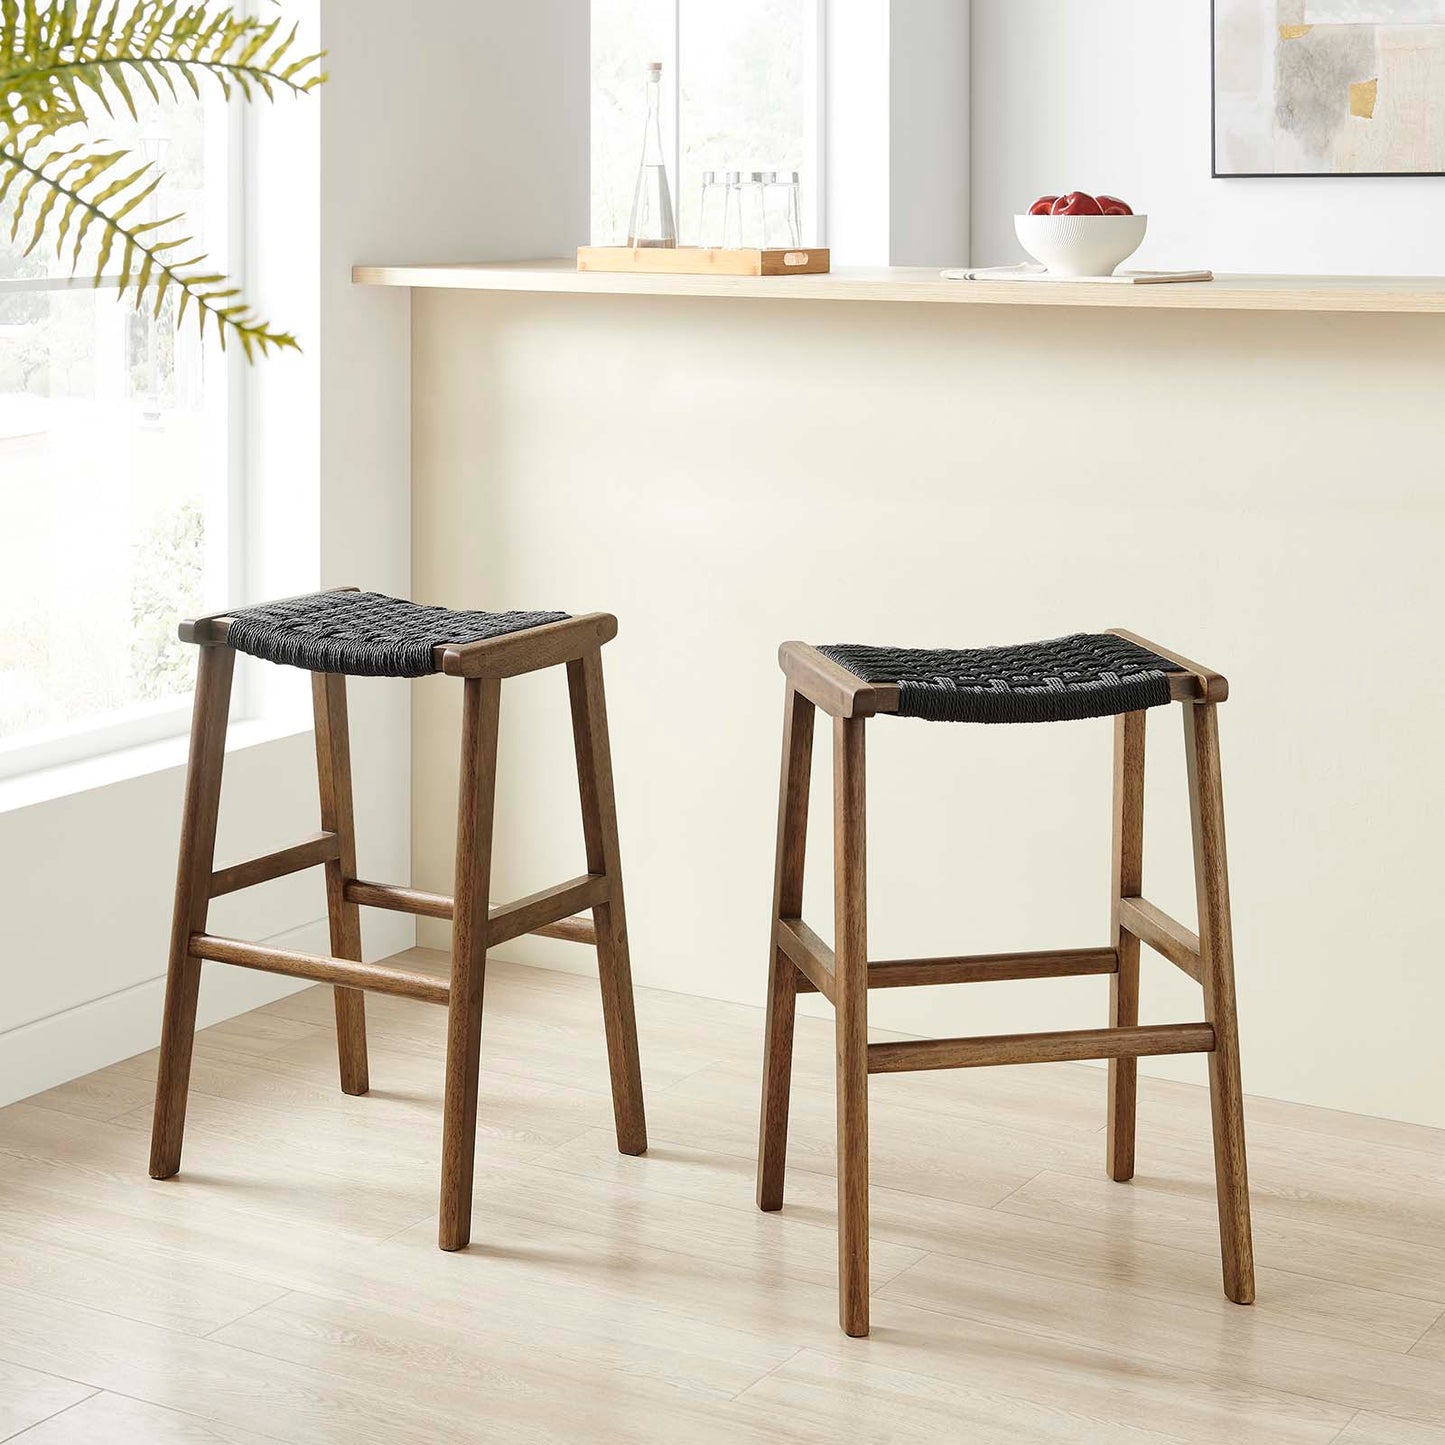 Saoirse Woven Rope Wood Bar Stool - Set of 2 By Modway - EEI-6550 | Bar Stools | Modway - 25